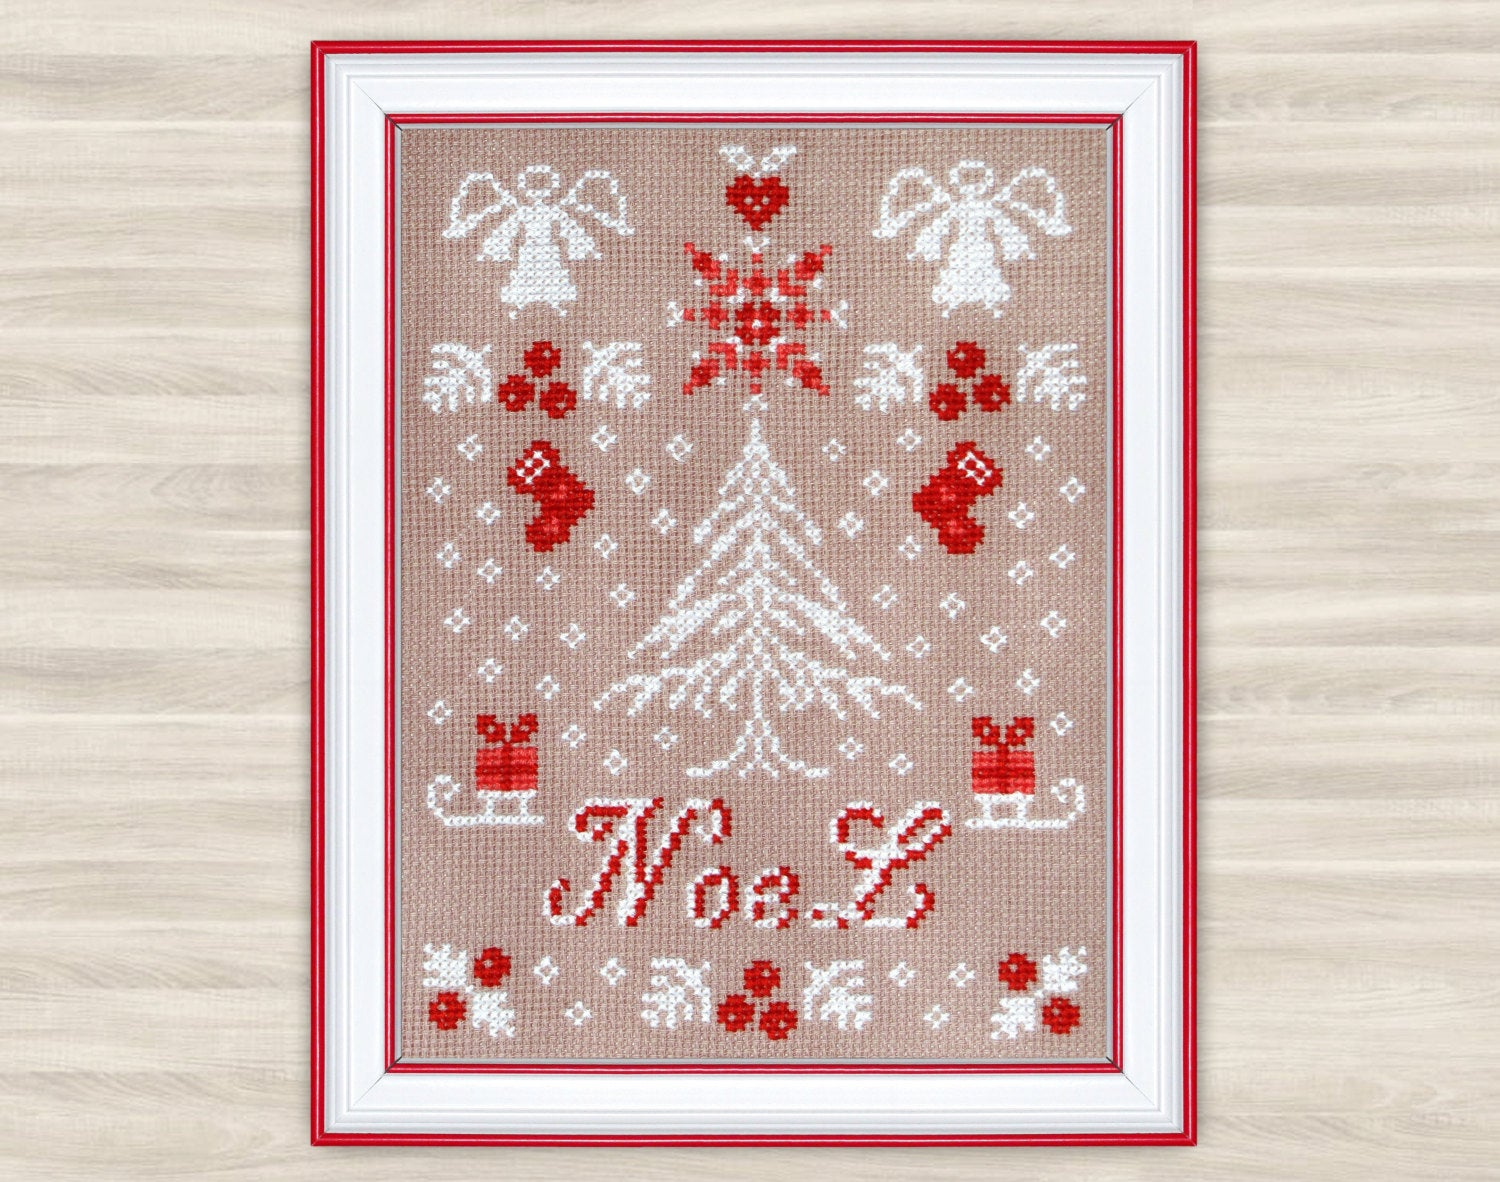 Embroidery Sampler Patterns Free Buy 2 Get 1 Free Noel Cross Stitch Pattern Pdf Winter Sampler Angels Christmas Tree Home Decor Snowflakes White Snow Sled New Years Gift